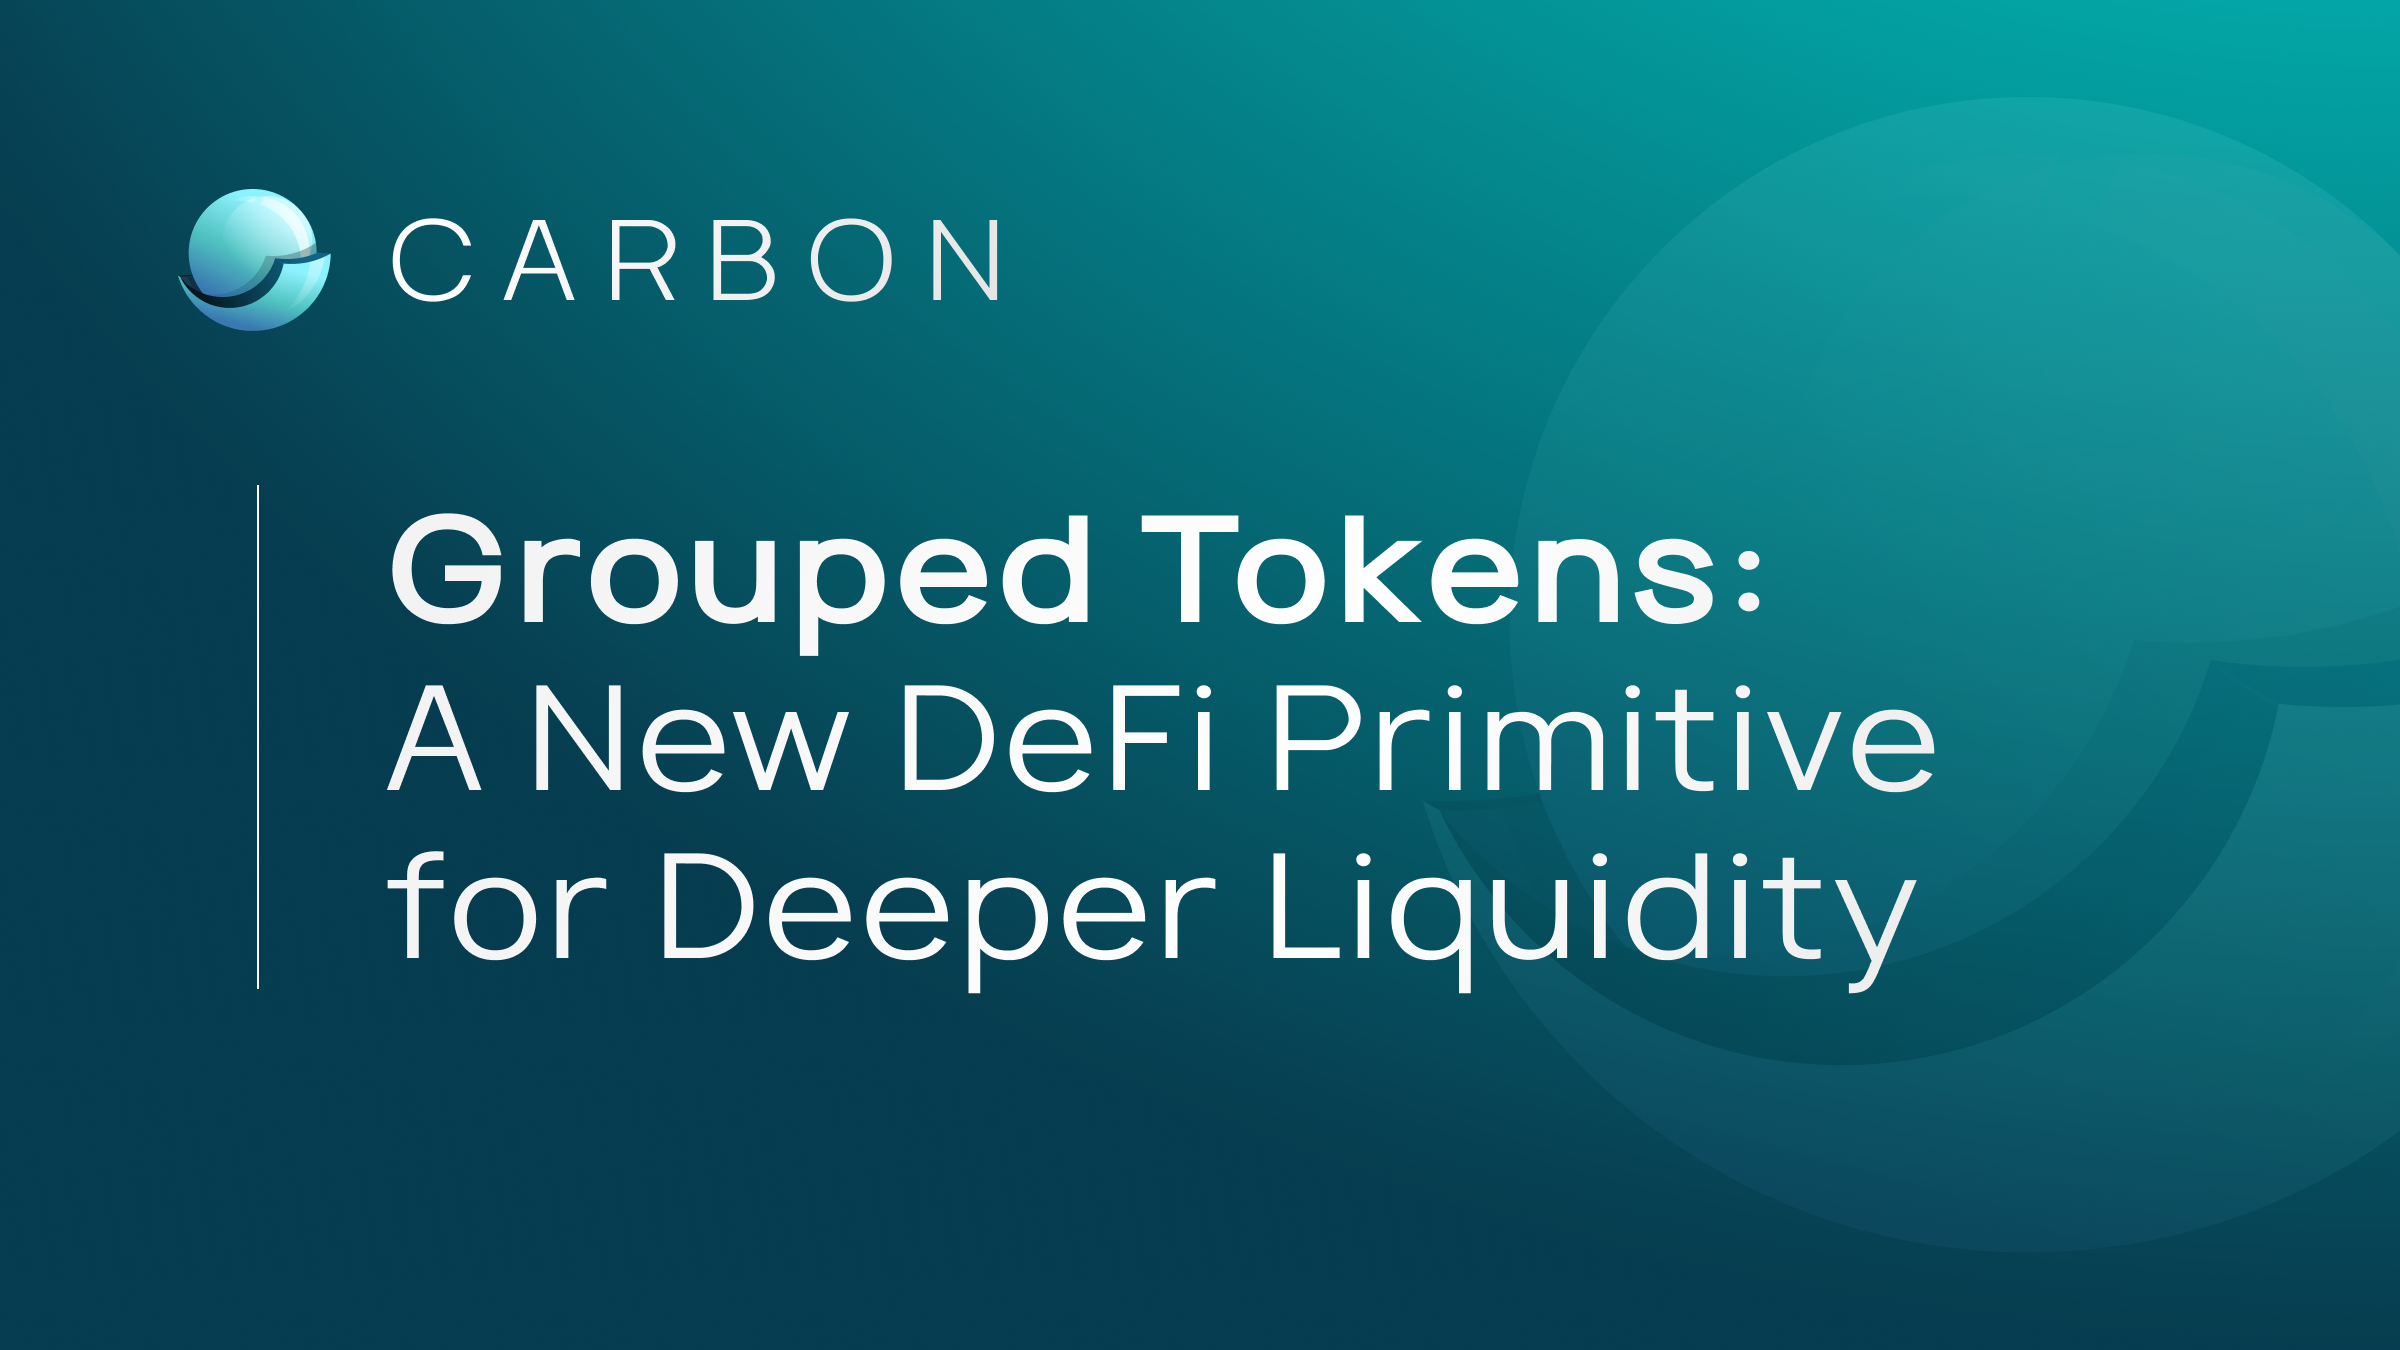 Grouped Tokens: A New DeFi Primitive for Deeper Liquidity